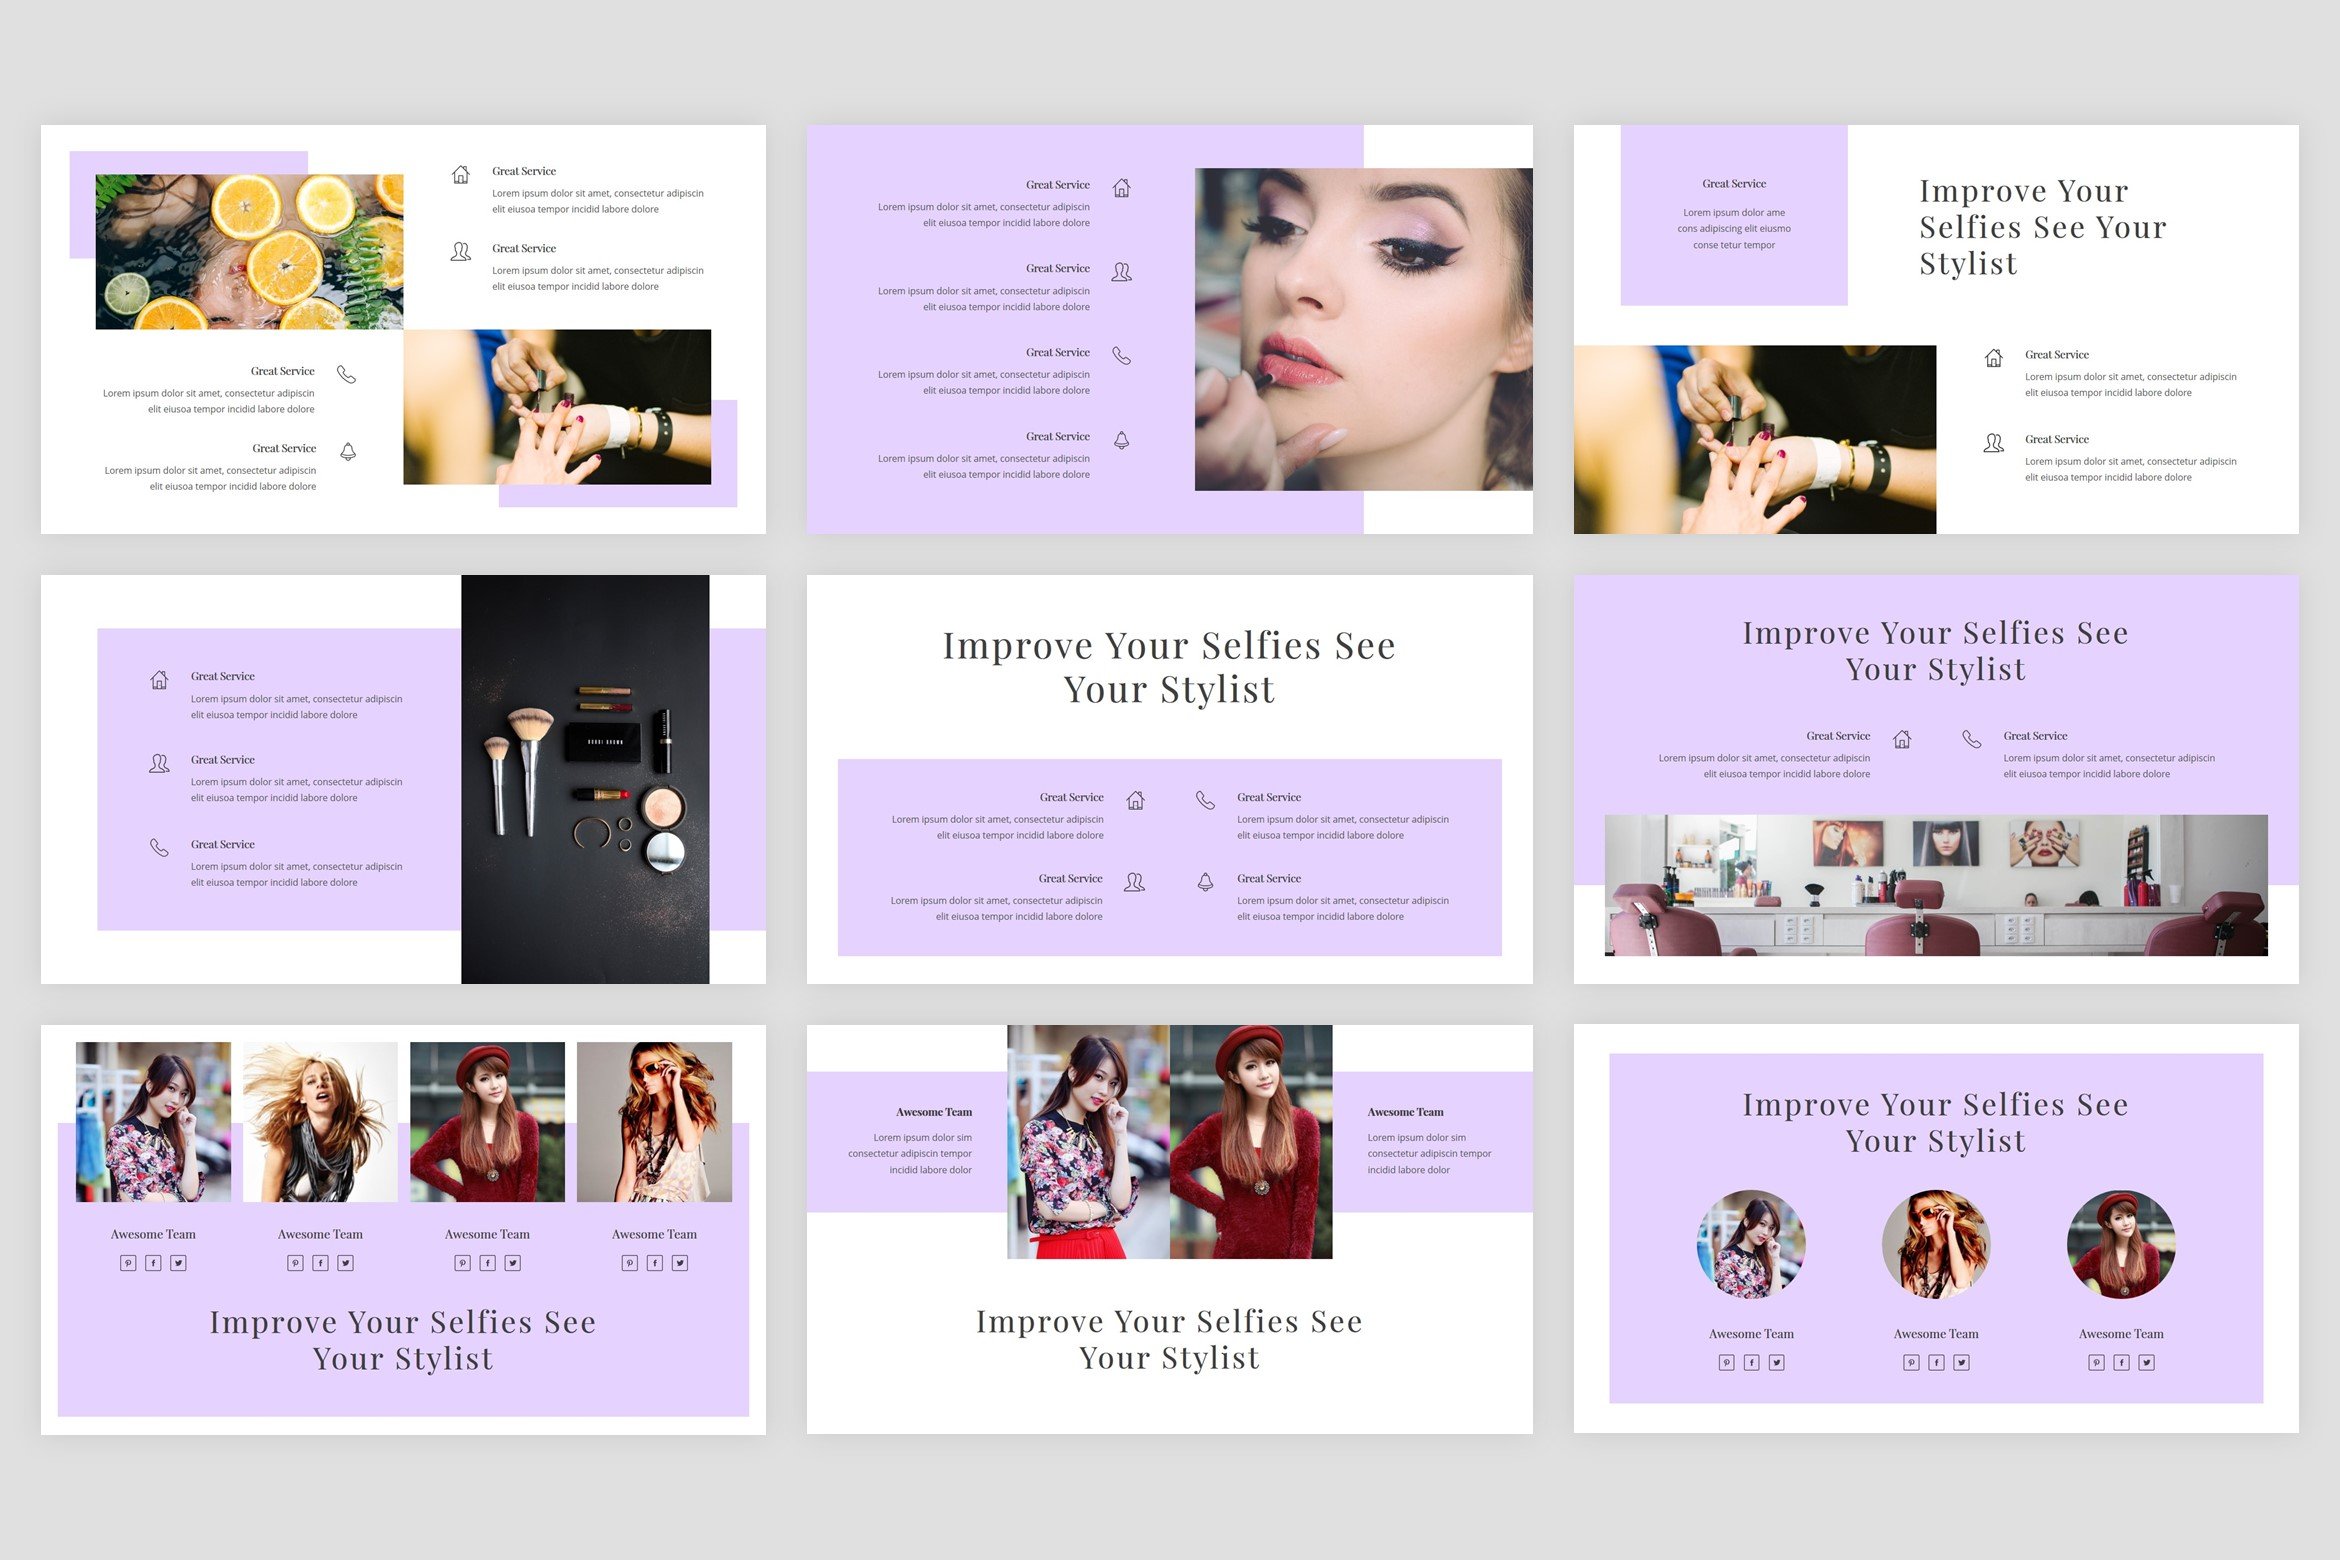 Template convenient to fashion and beauty industries.